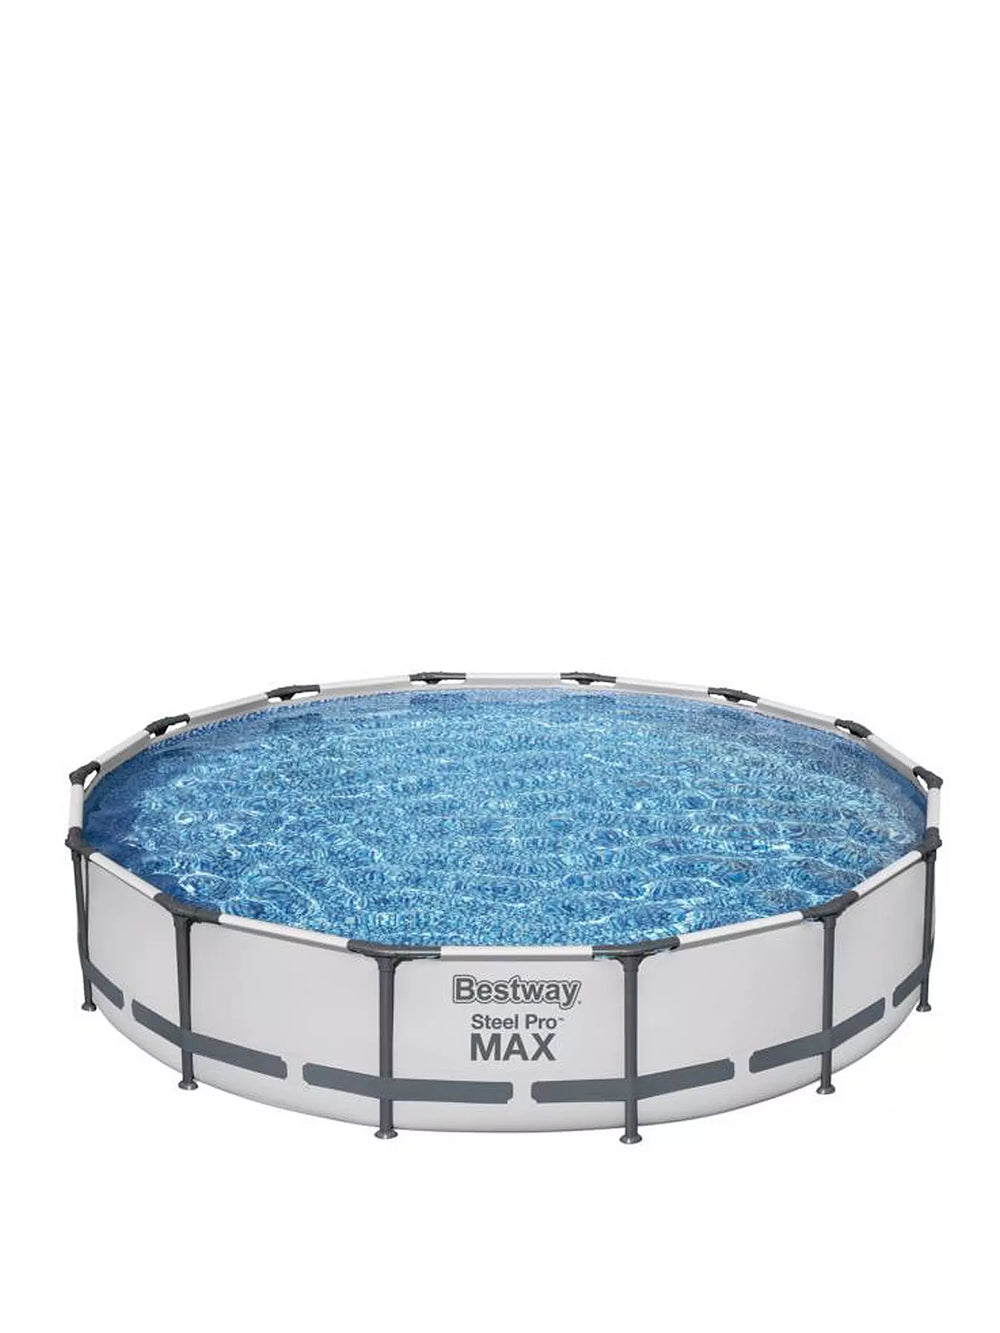 Bestway 14ft Steel Pro MAX Pool with Filter Pump